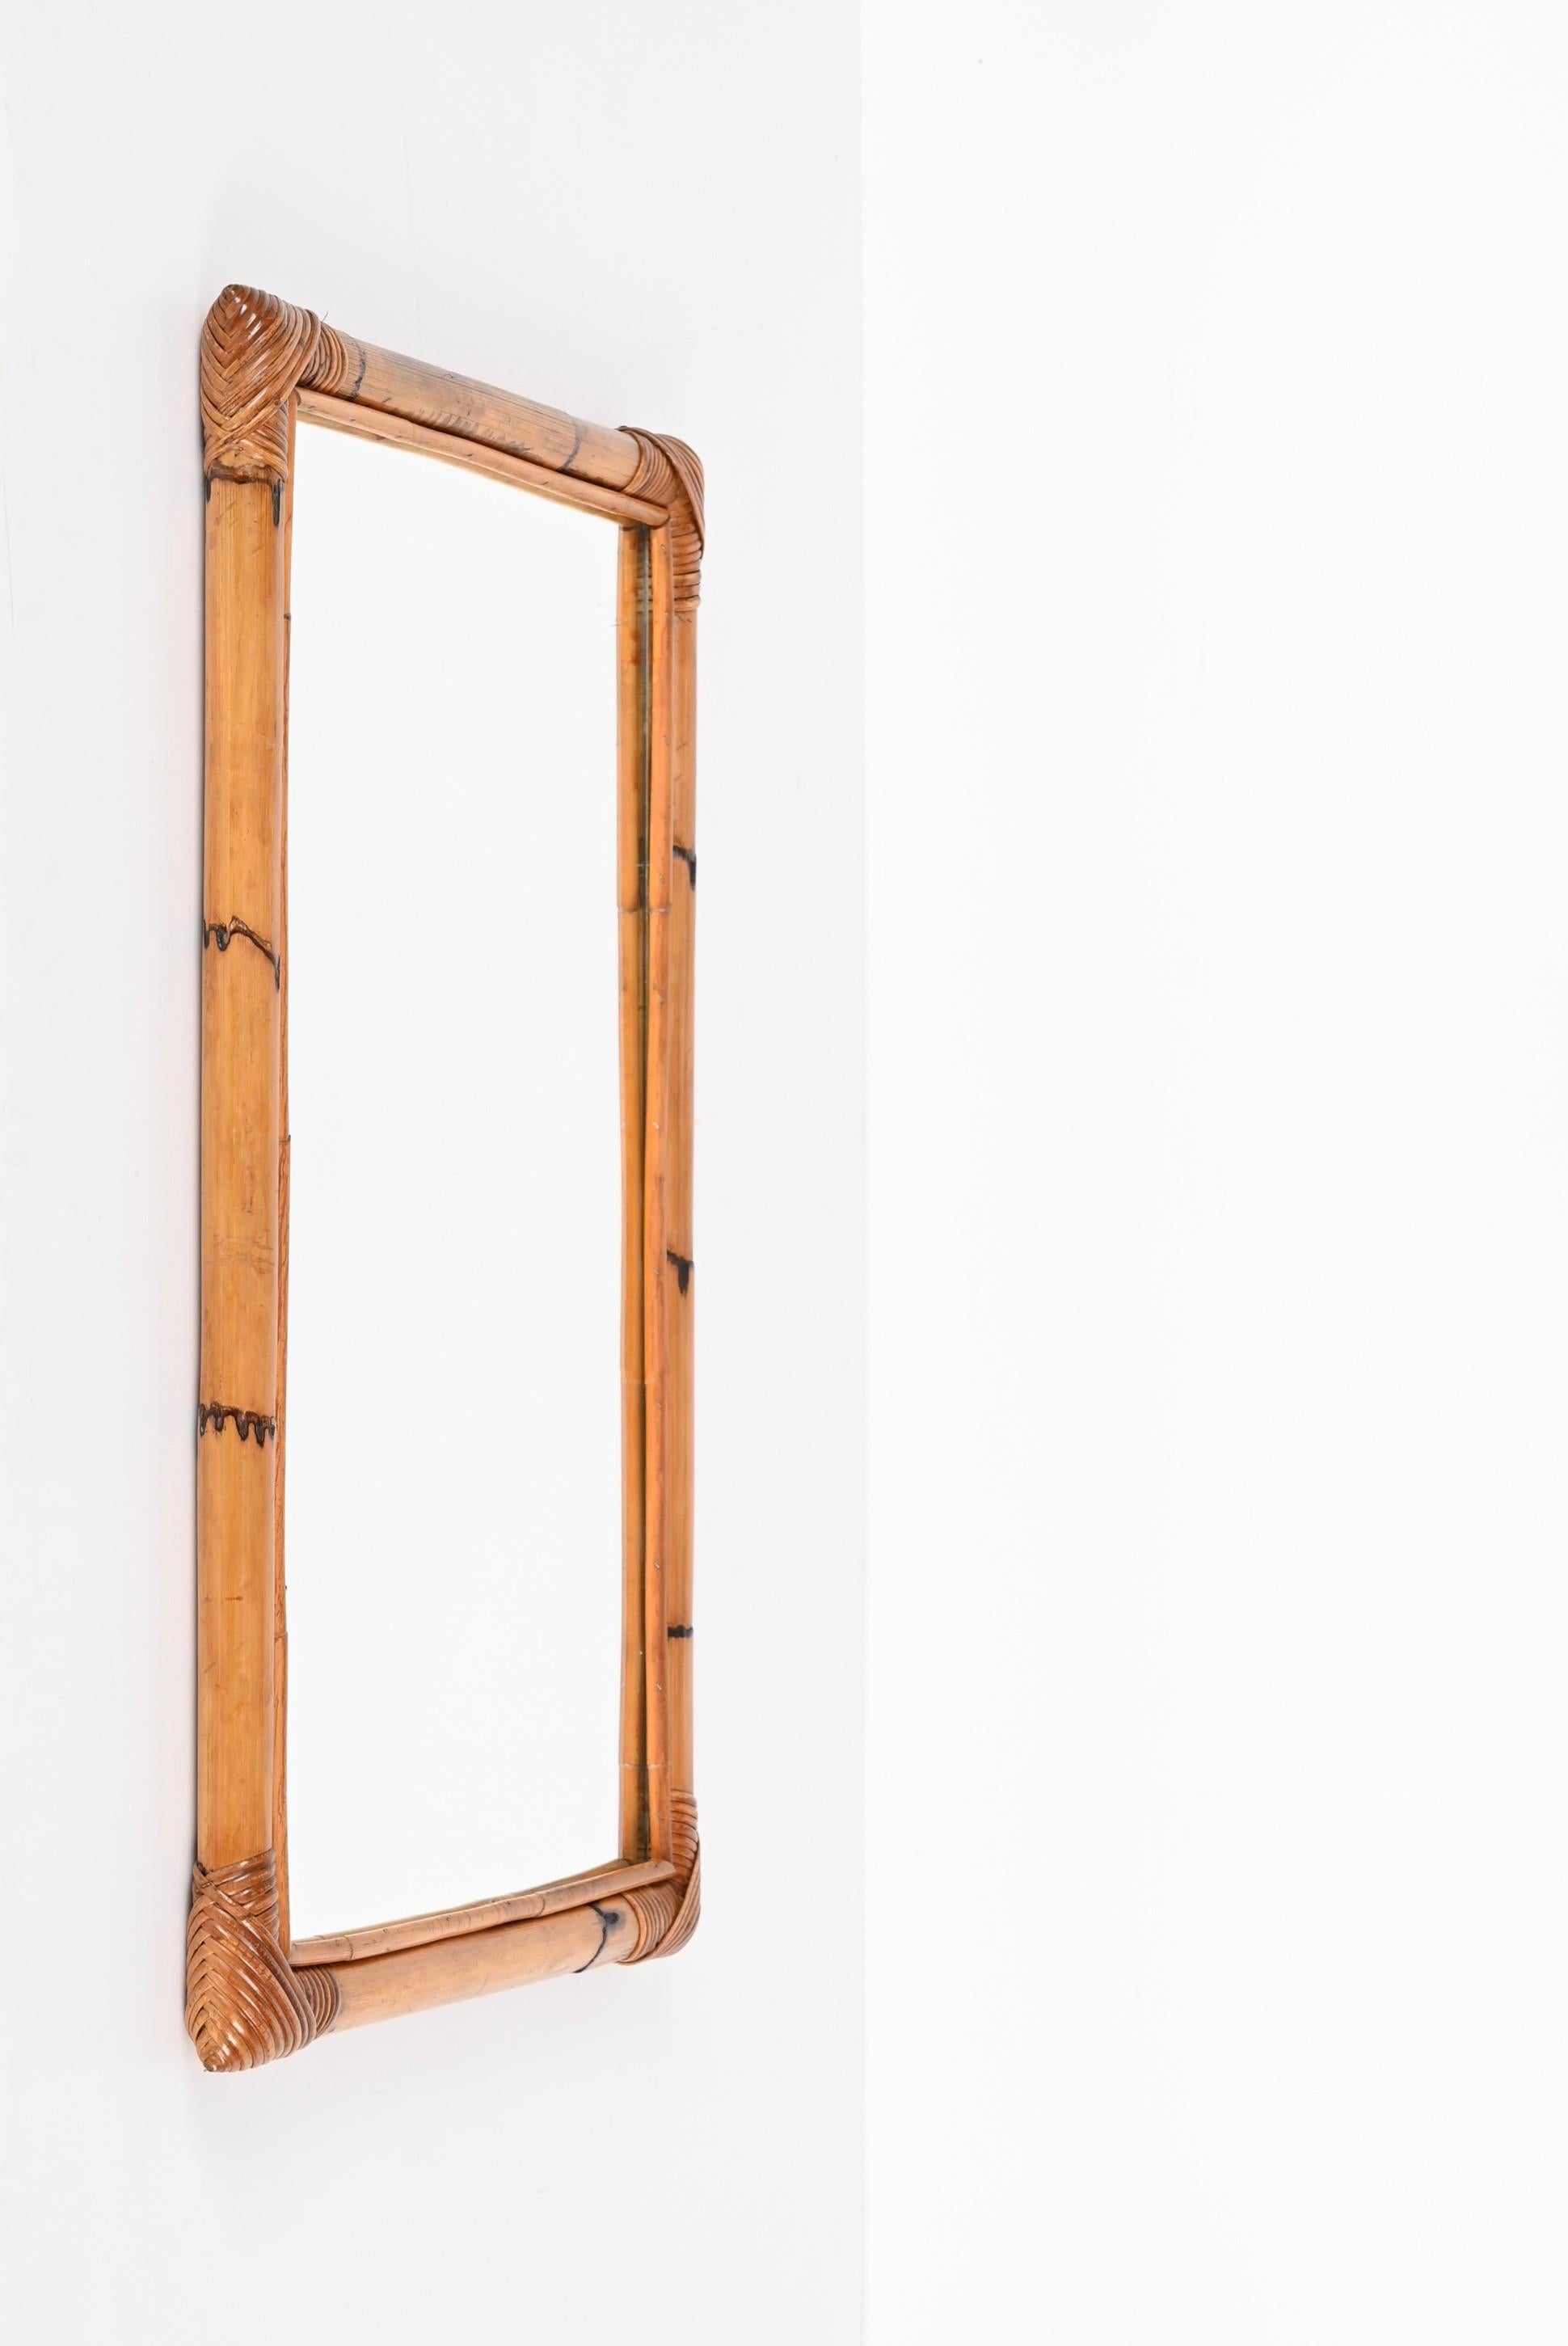 20th Century Midcentury Rectangular Italian Mirror with Double Bamboo Cane Frame, 1970s For Sale